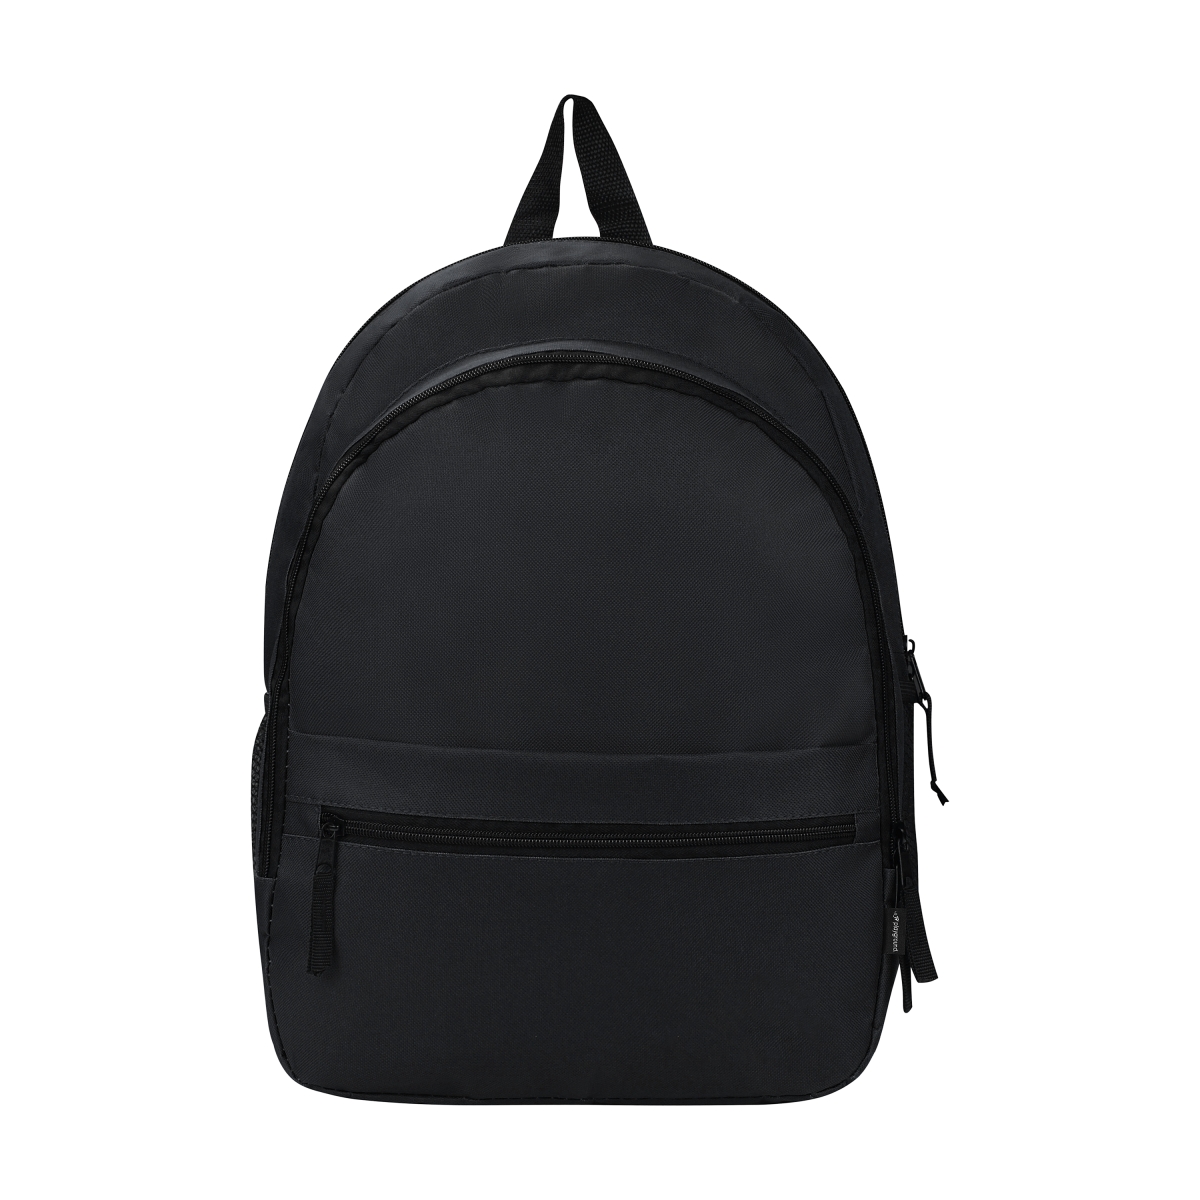 Playground Freestyle Backpack Black. - Showspace